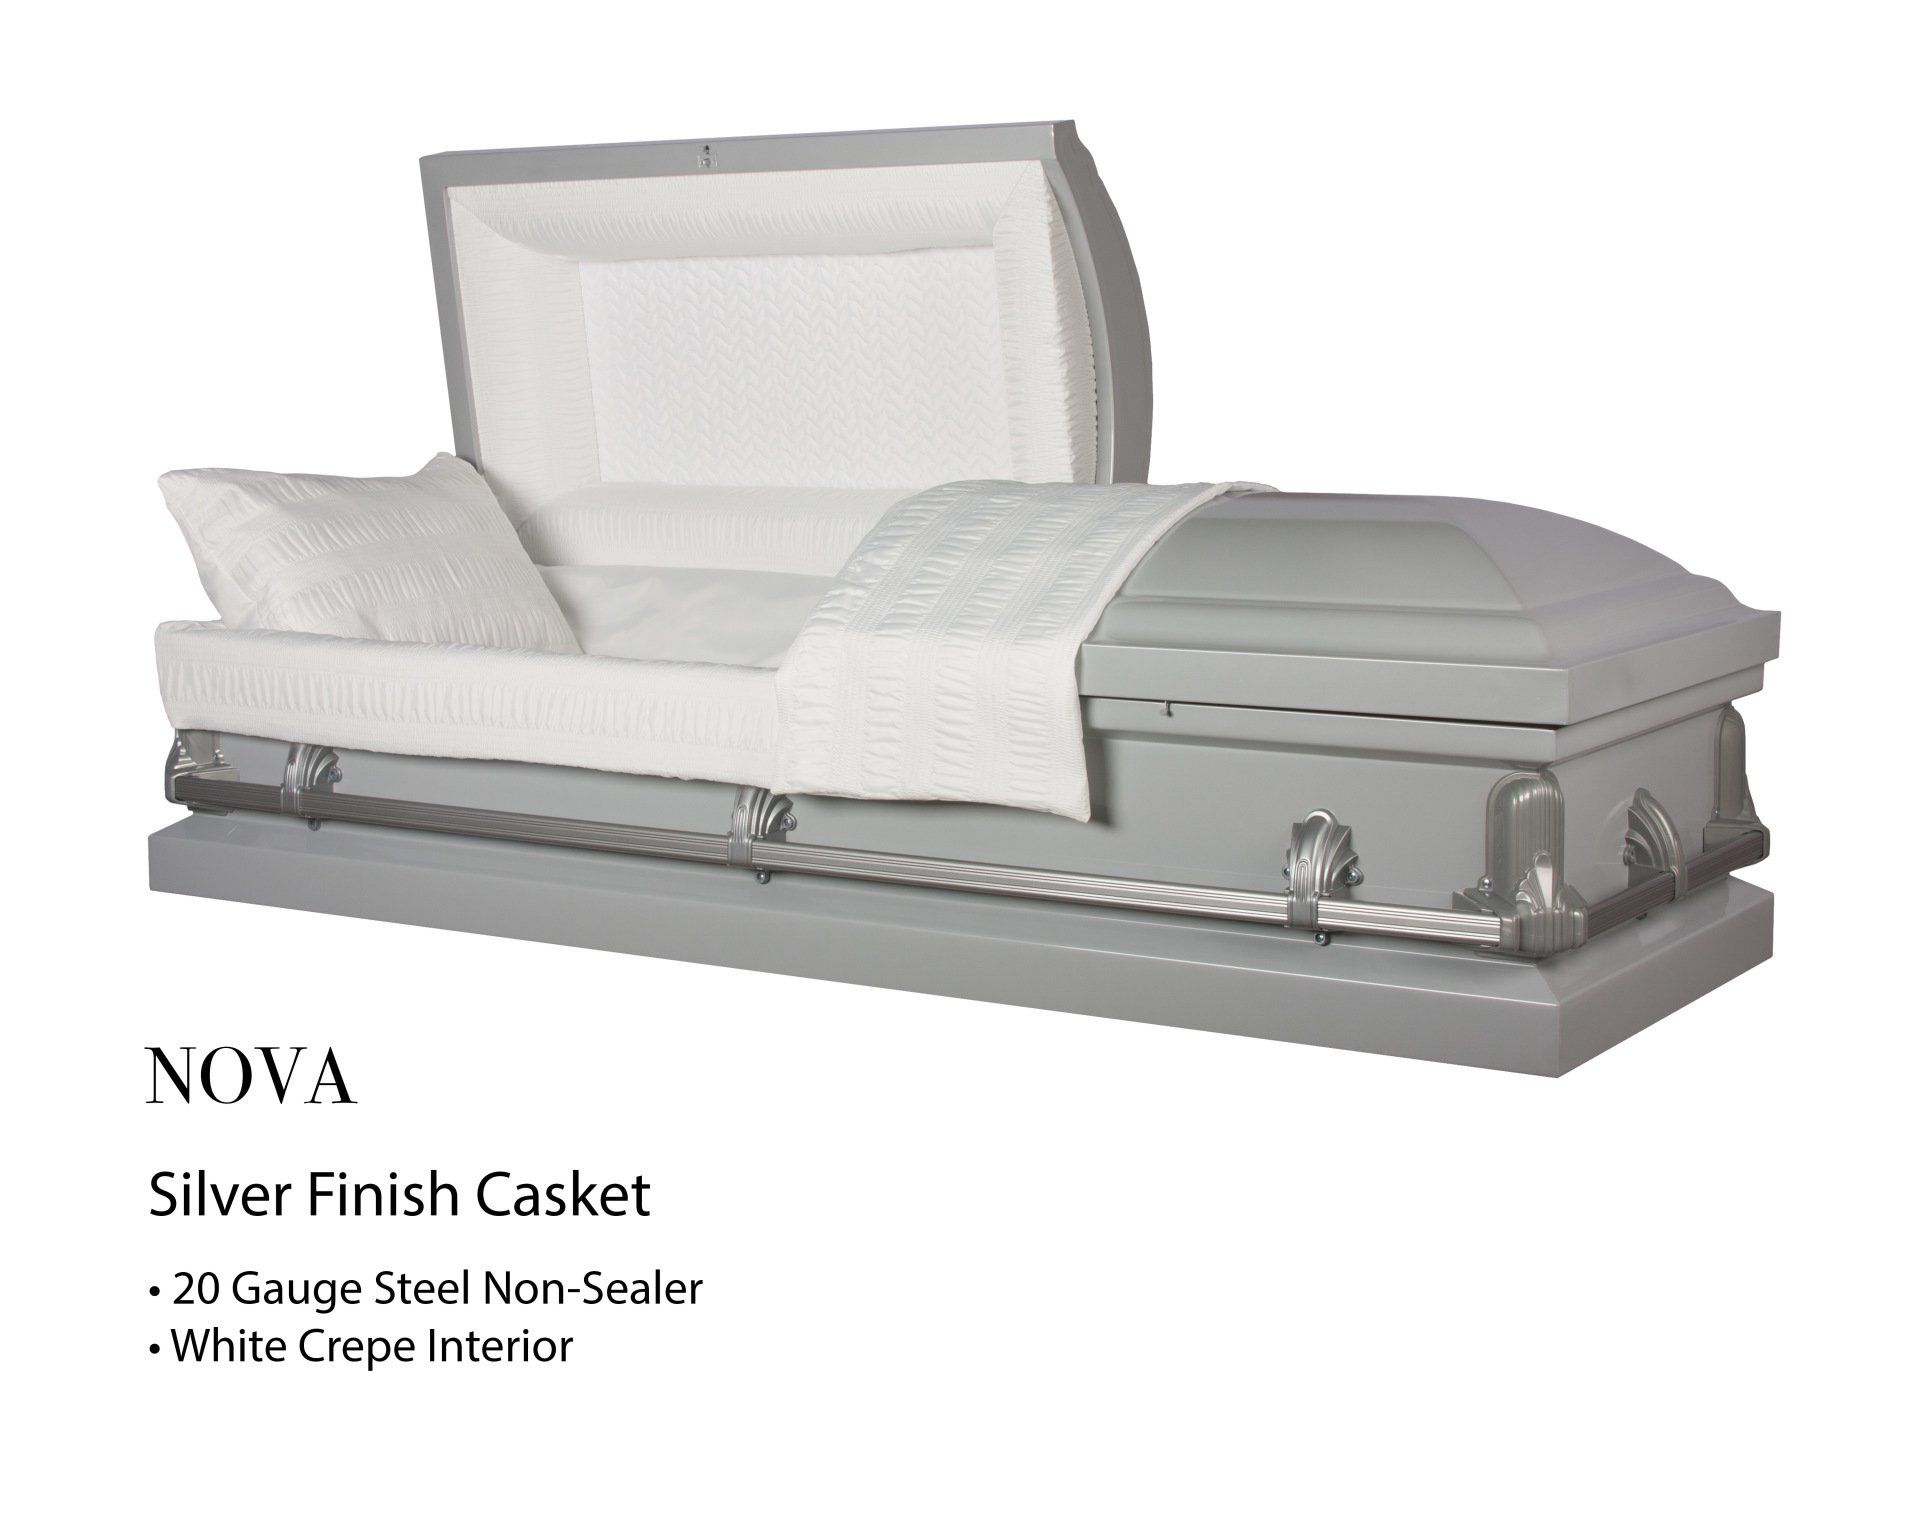 Direct Burial- Lic Cremation Service